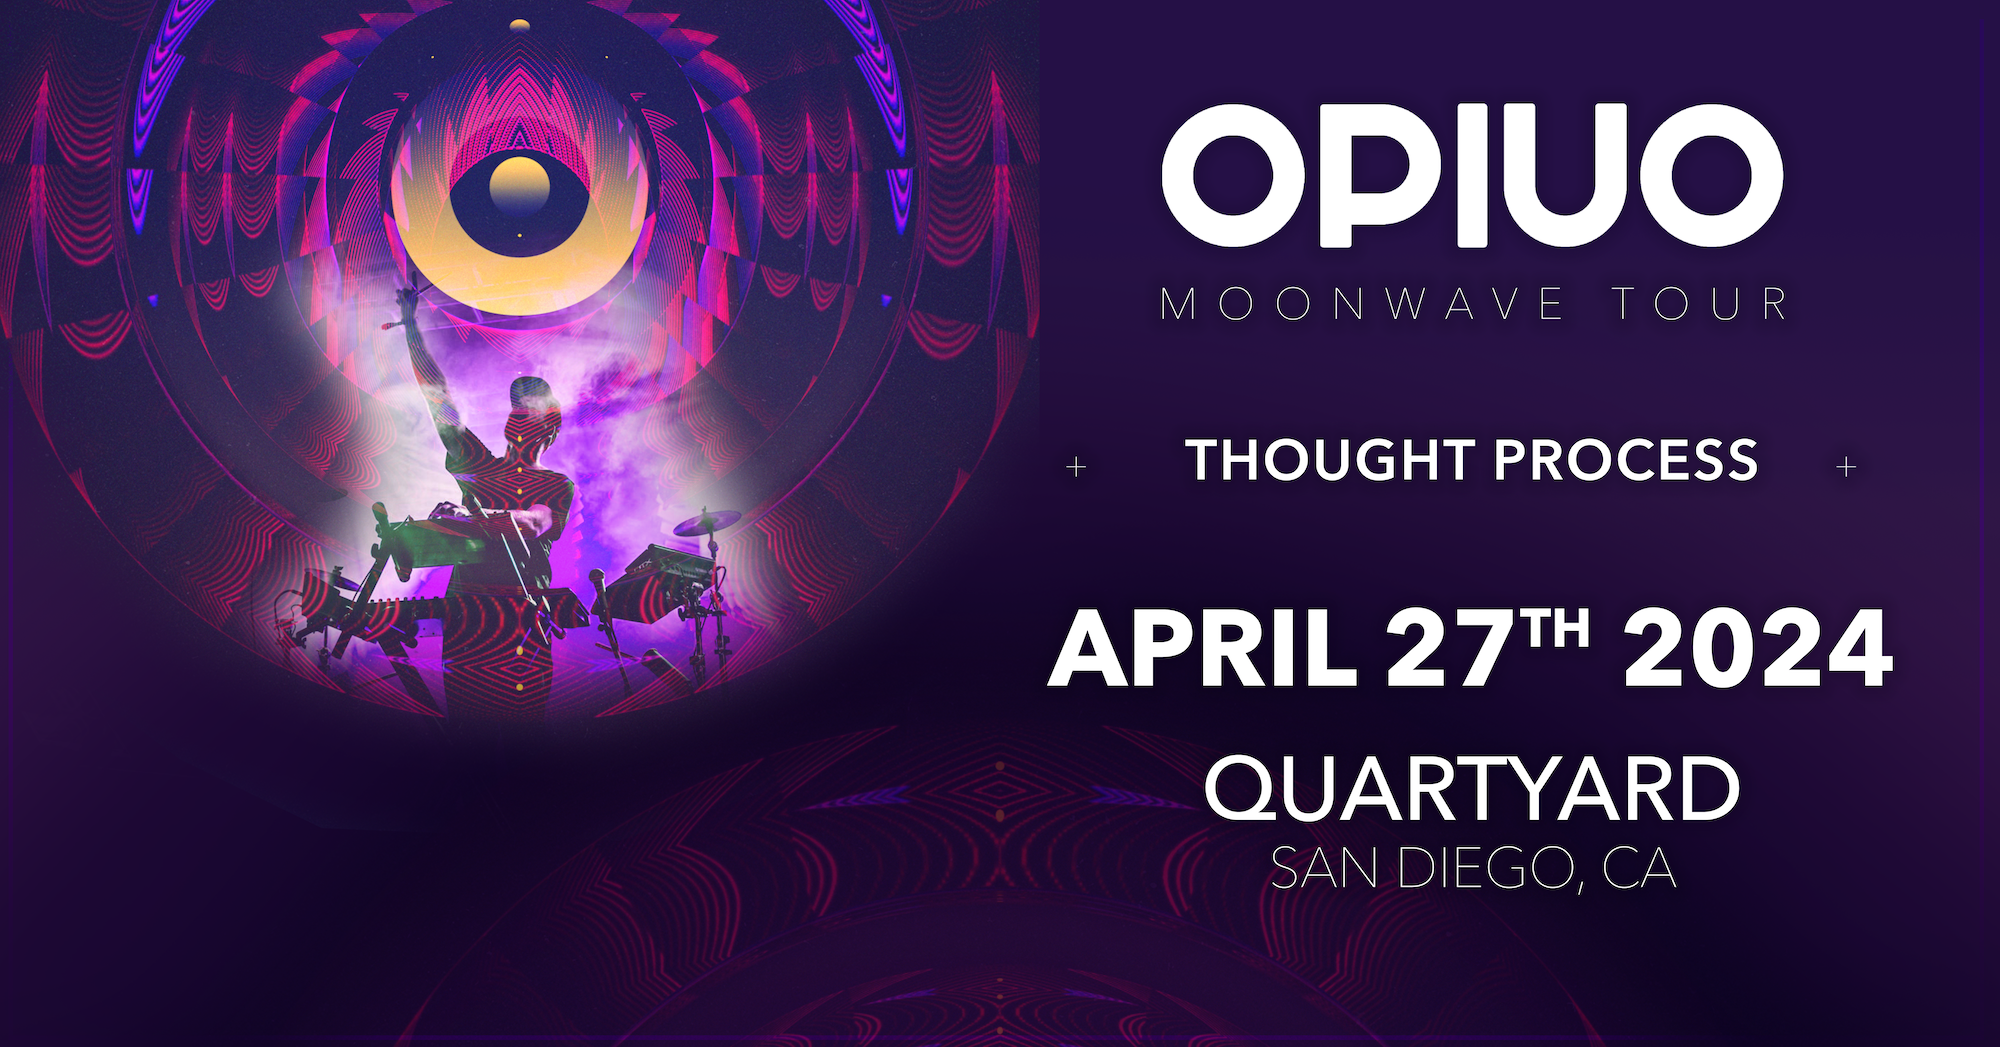 OPIUO: The Moonwave Tour - フライヤー表